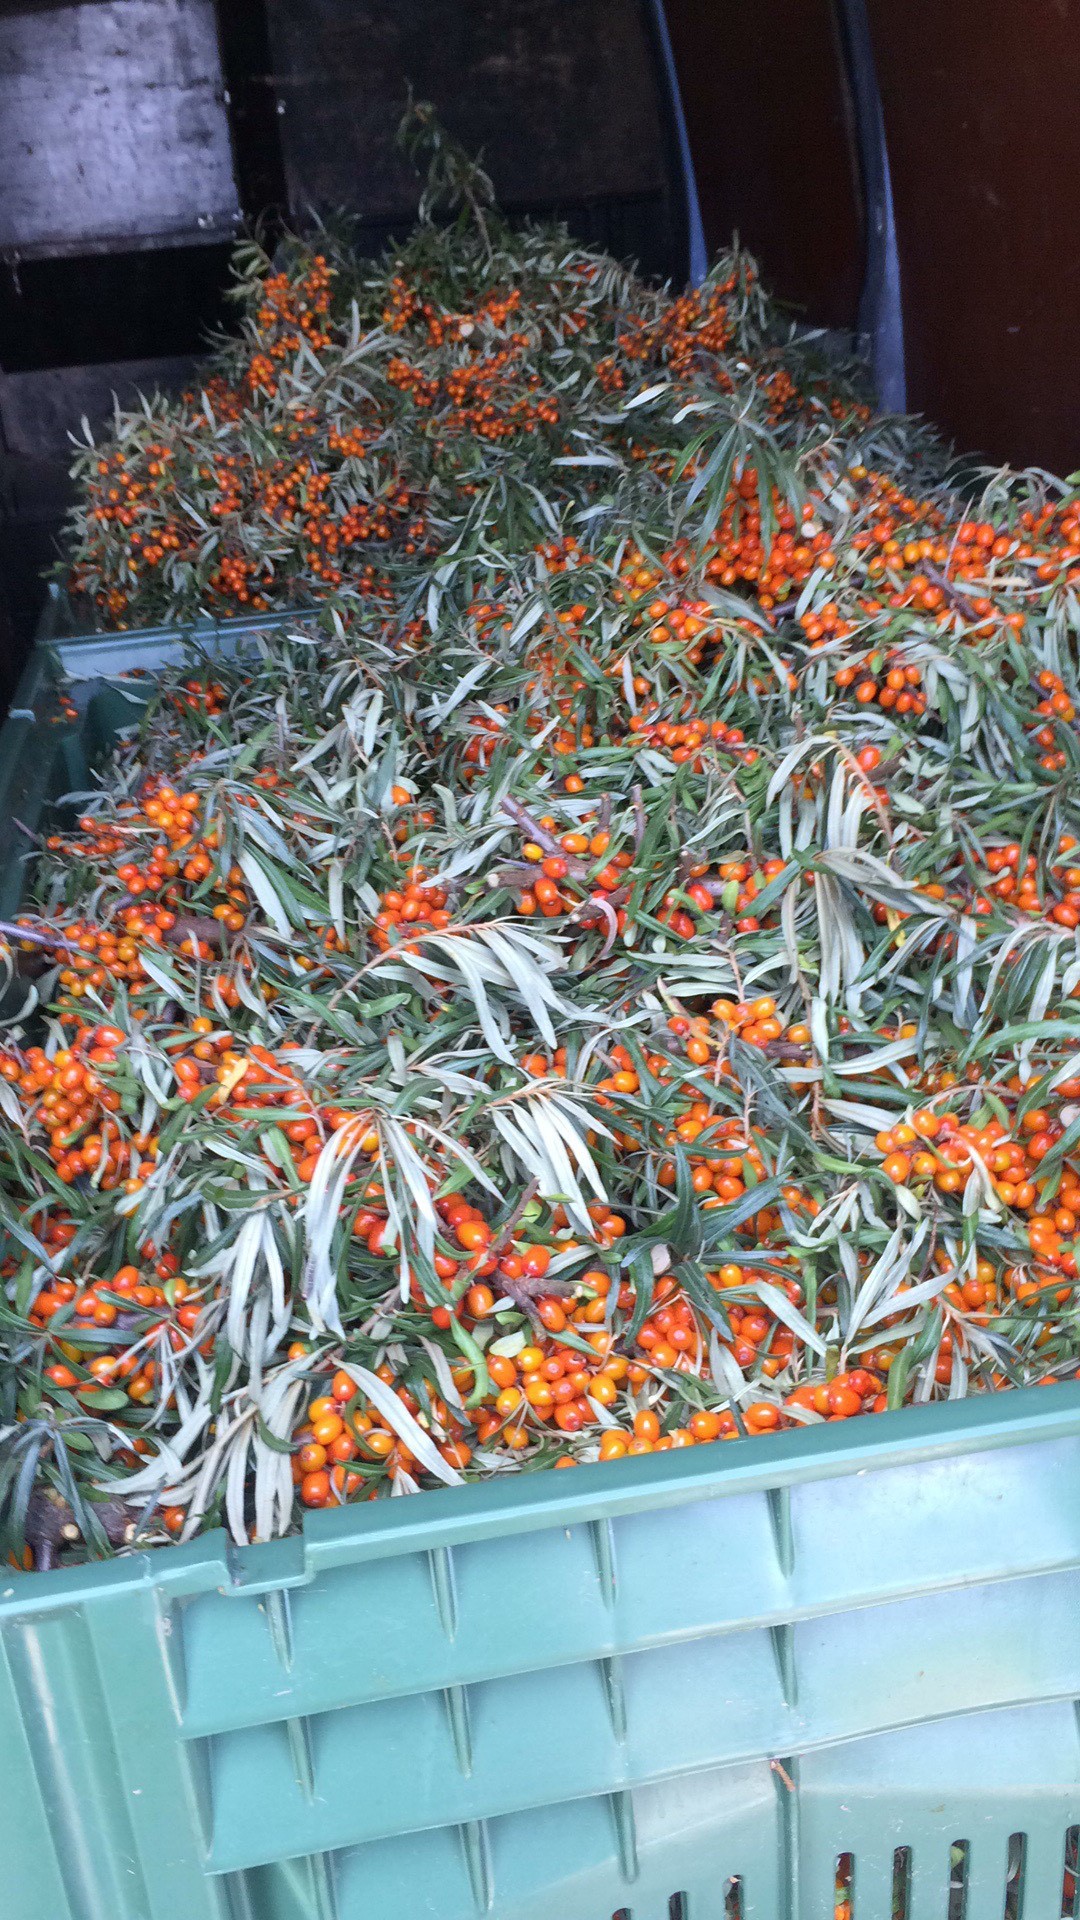 Harvested, loaded seabuckthorn. Transporting to freeze.